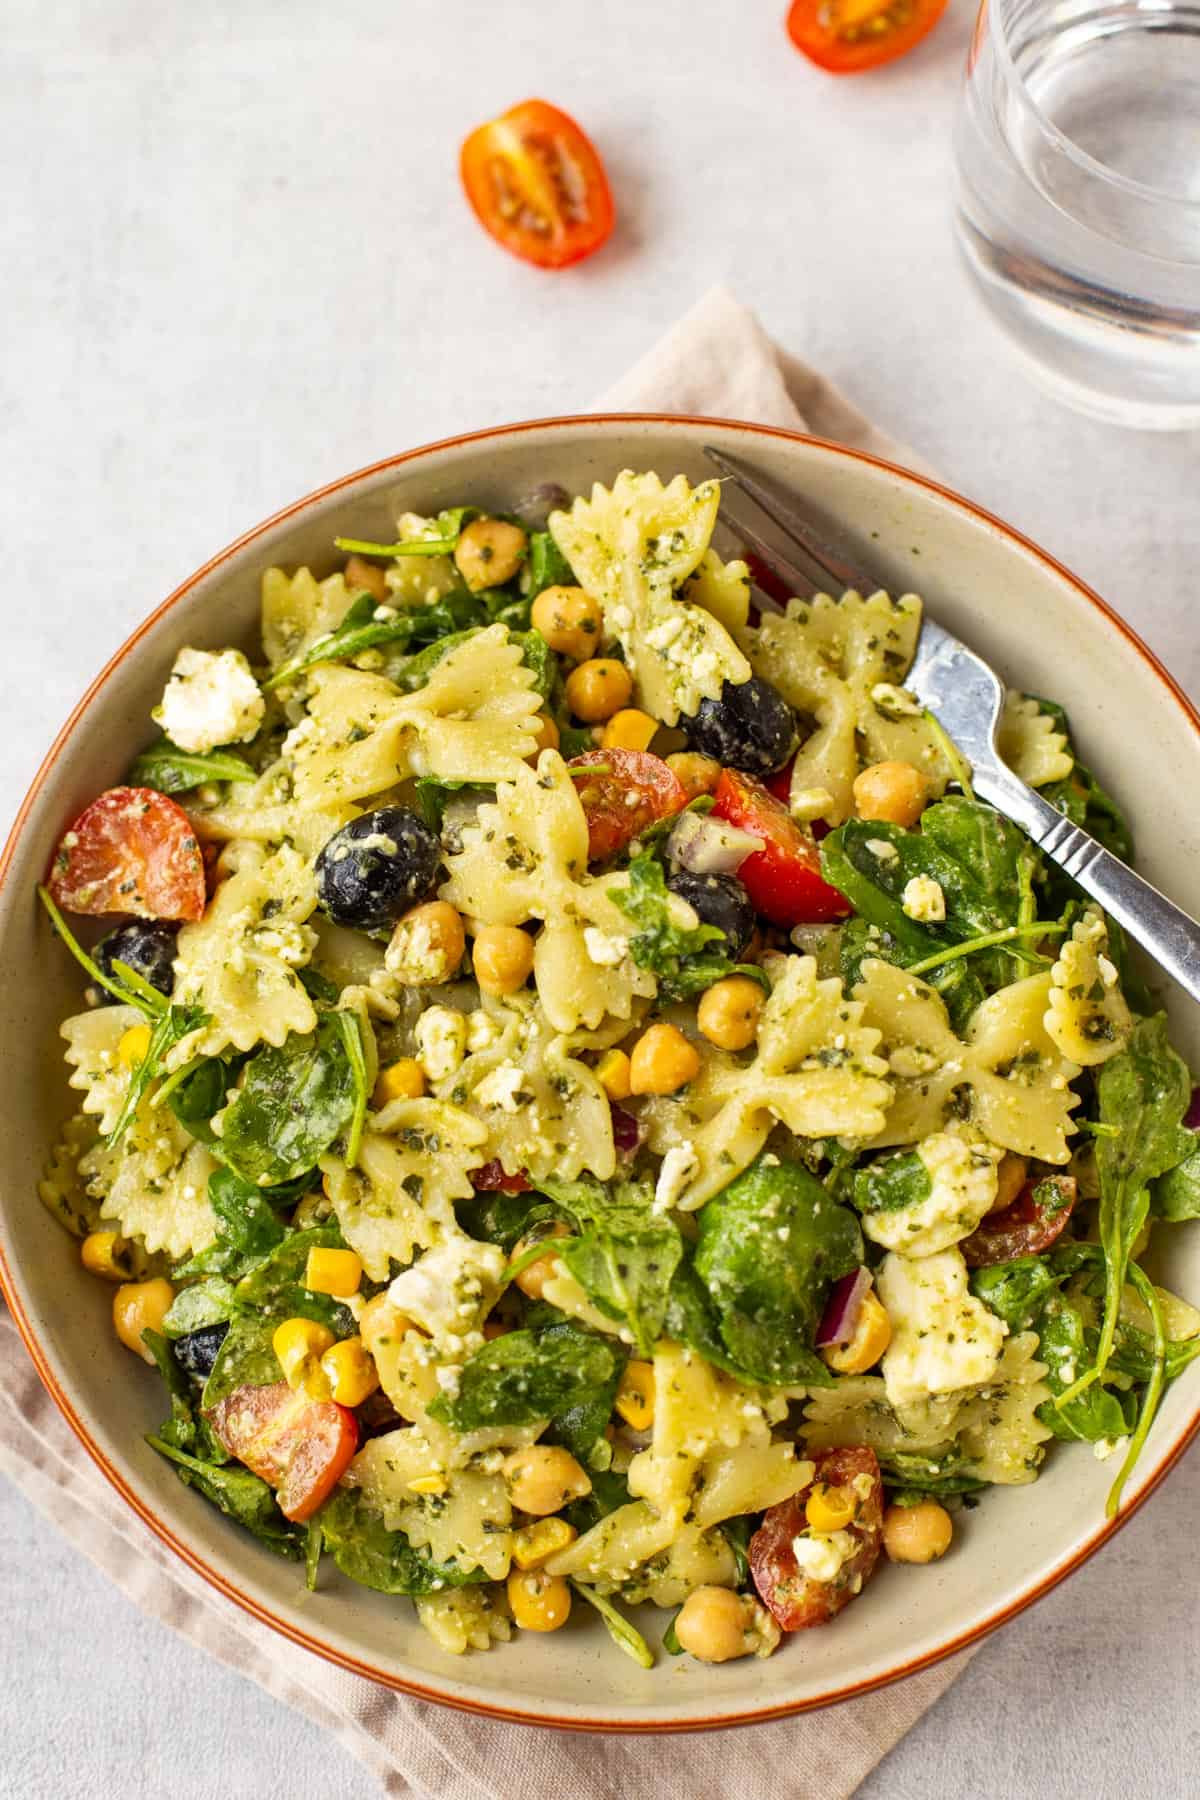 A portion of chickpea pasta salad with olives and feta in a bowl.